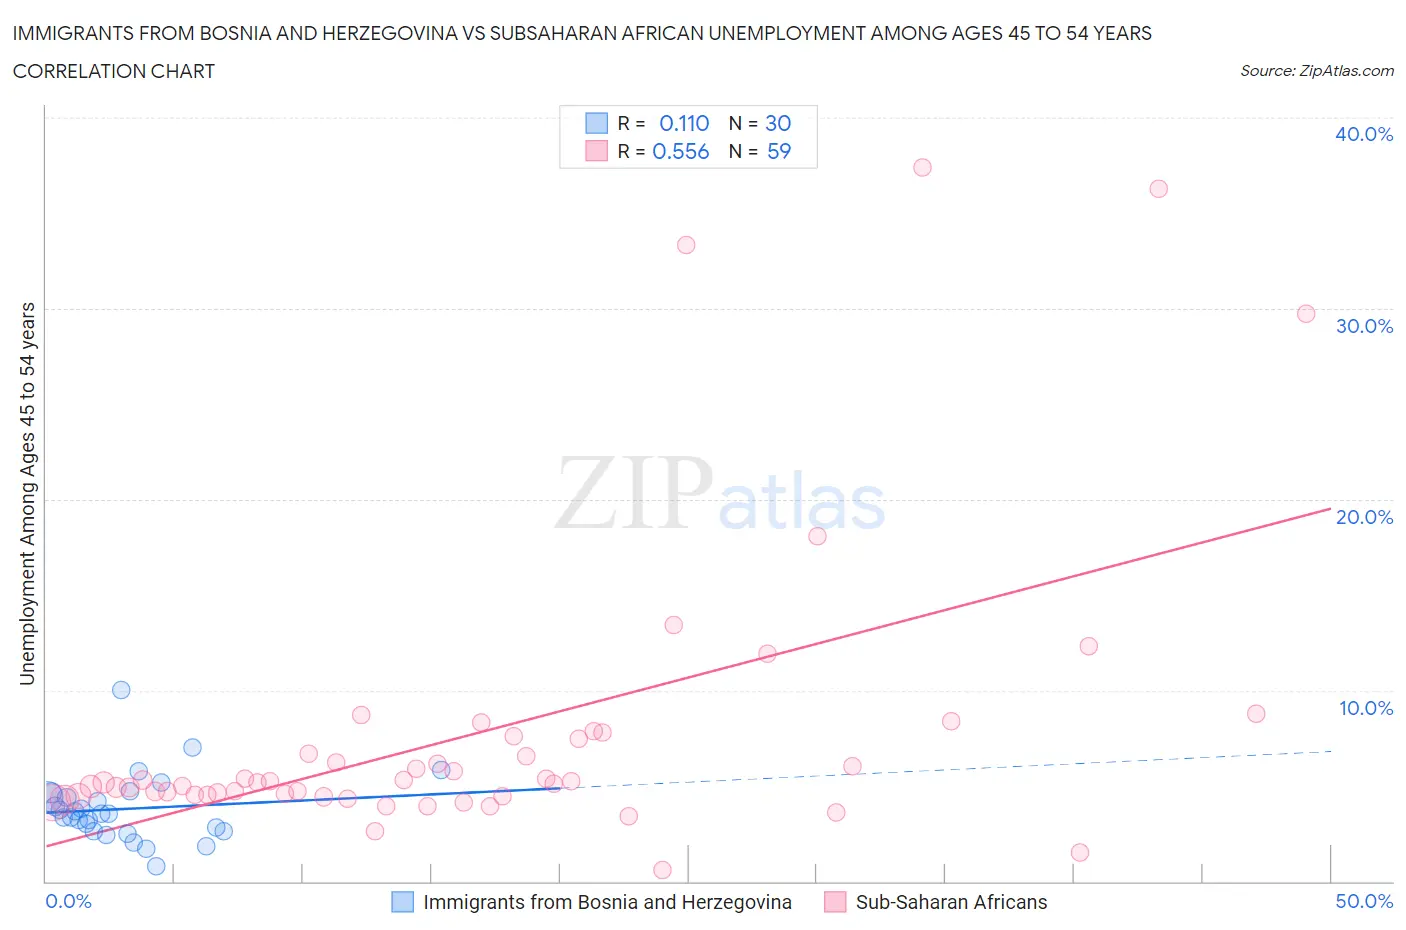 Immigrants from Bosnia and Herzegovina vs Subsaharan African Unemployment Among Ages 45 to 54 years